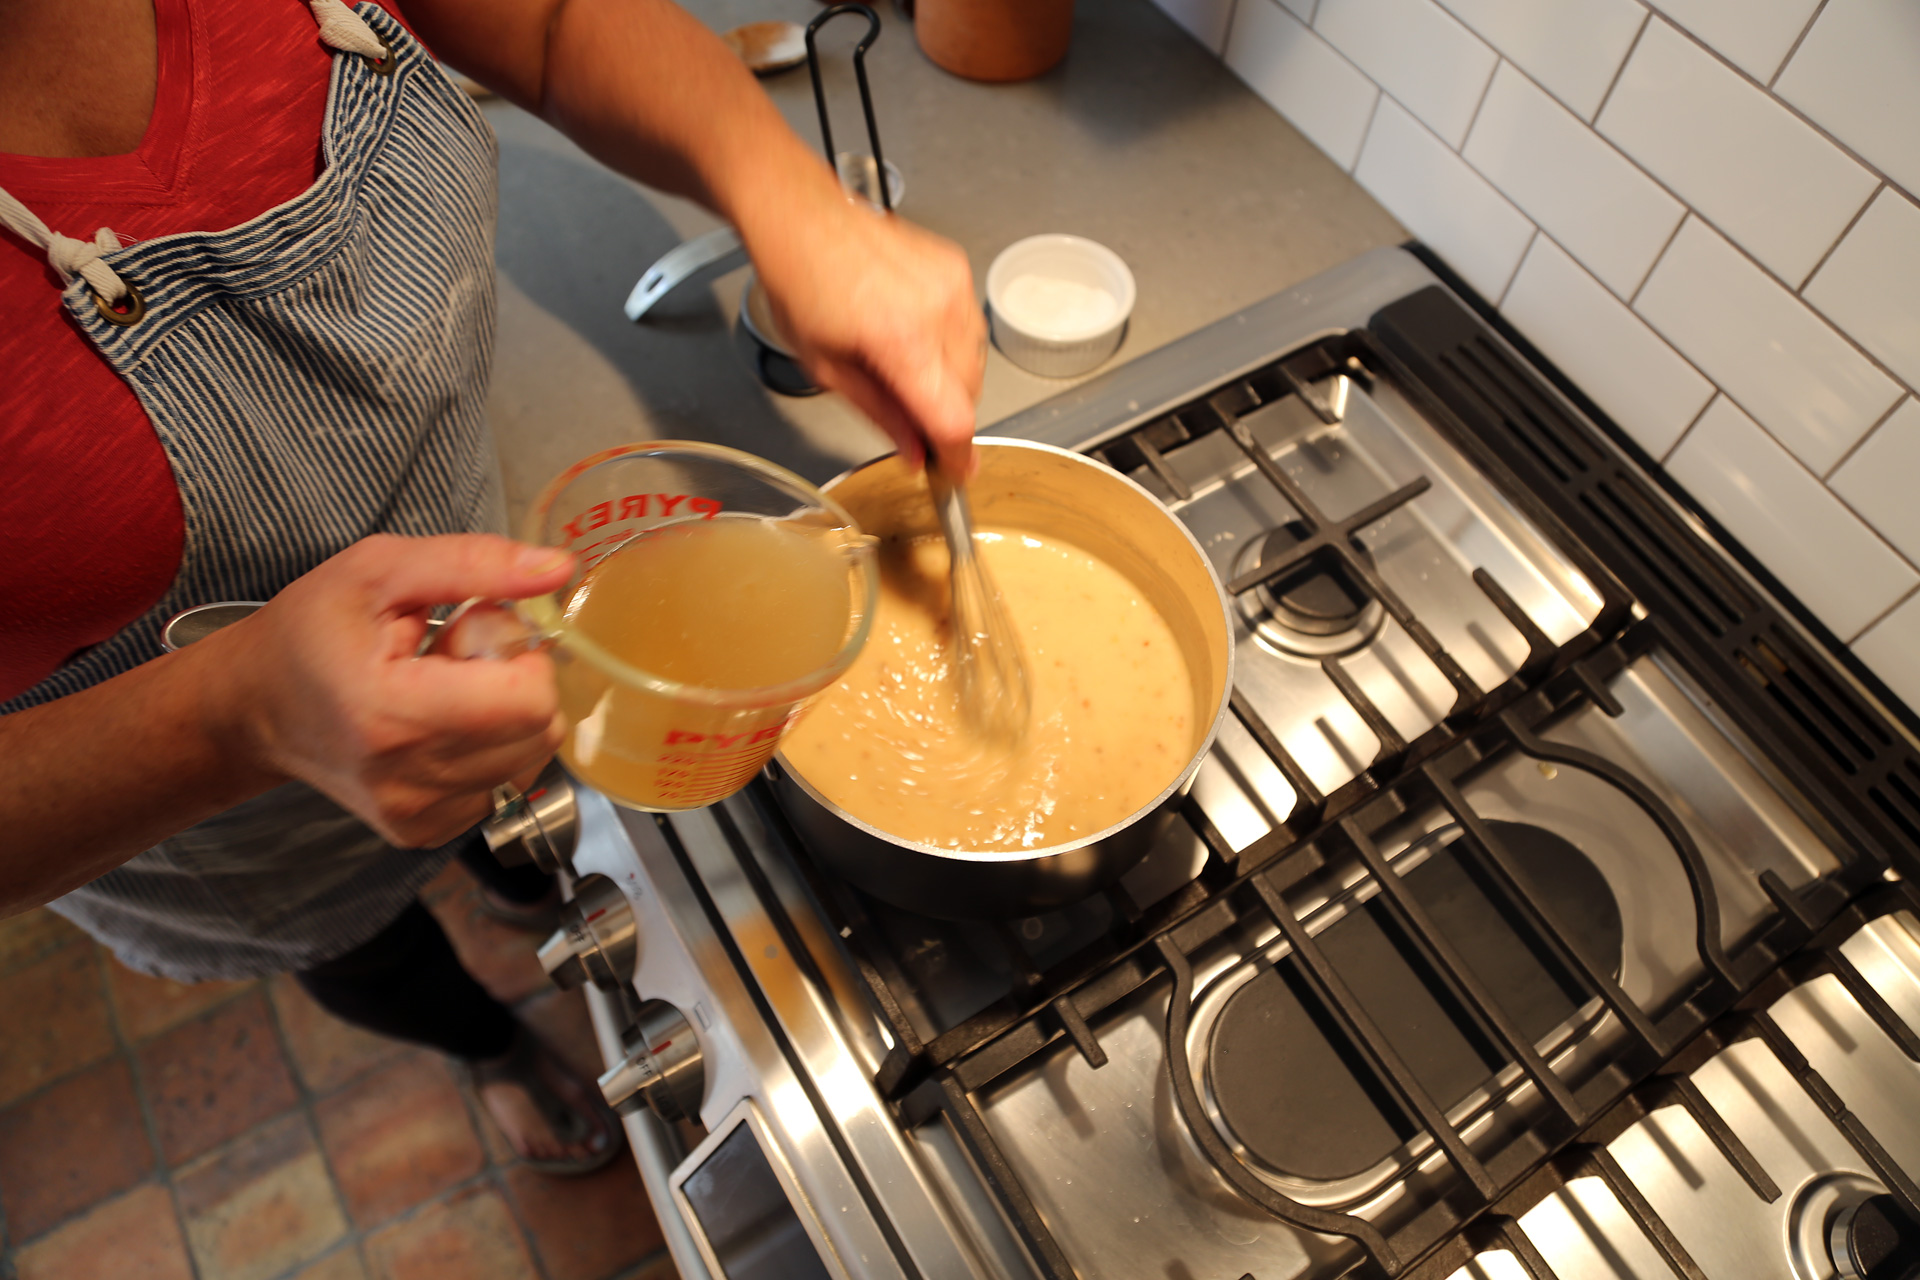 Add more or less stock to get to the consistency you like (depending on whether you like a thicker or thinner gravy).